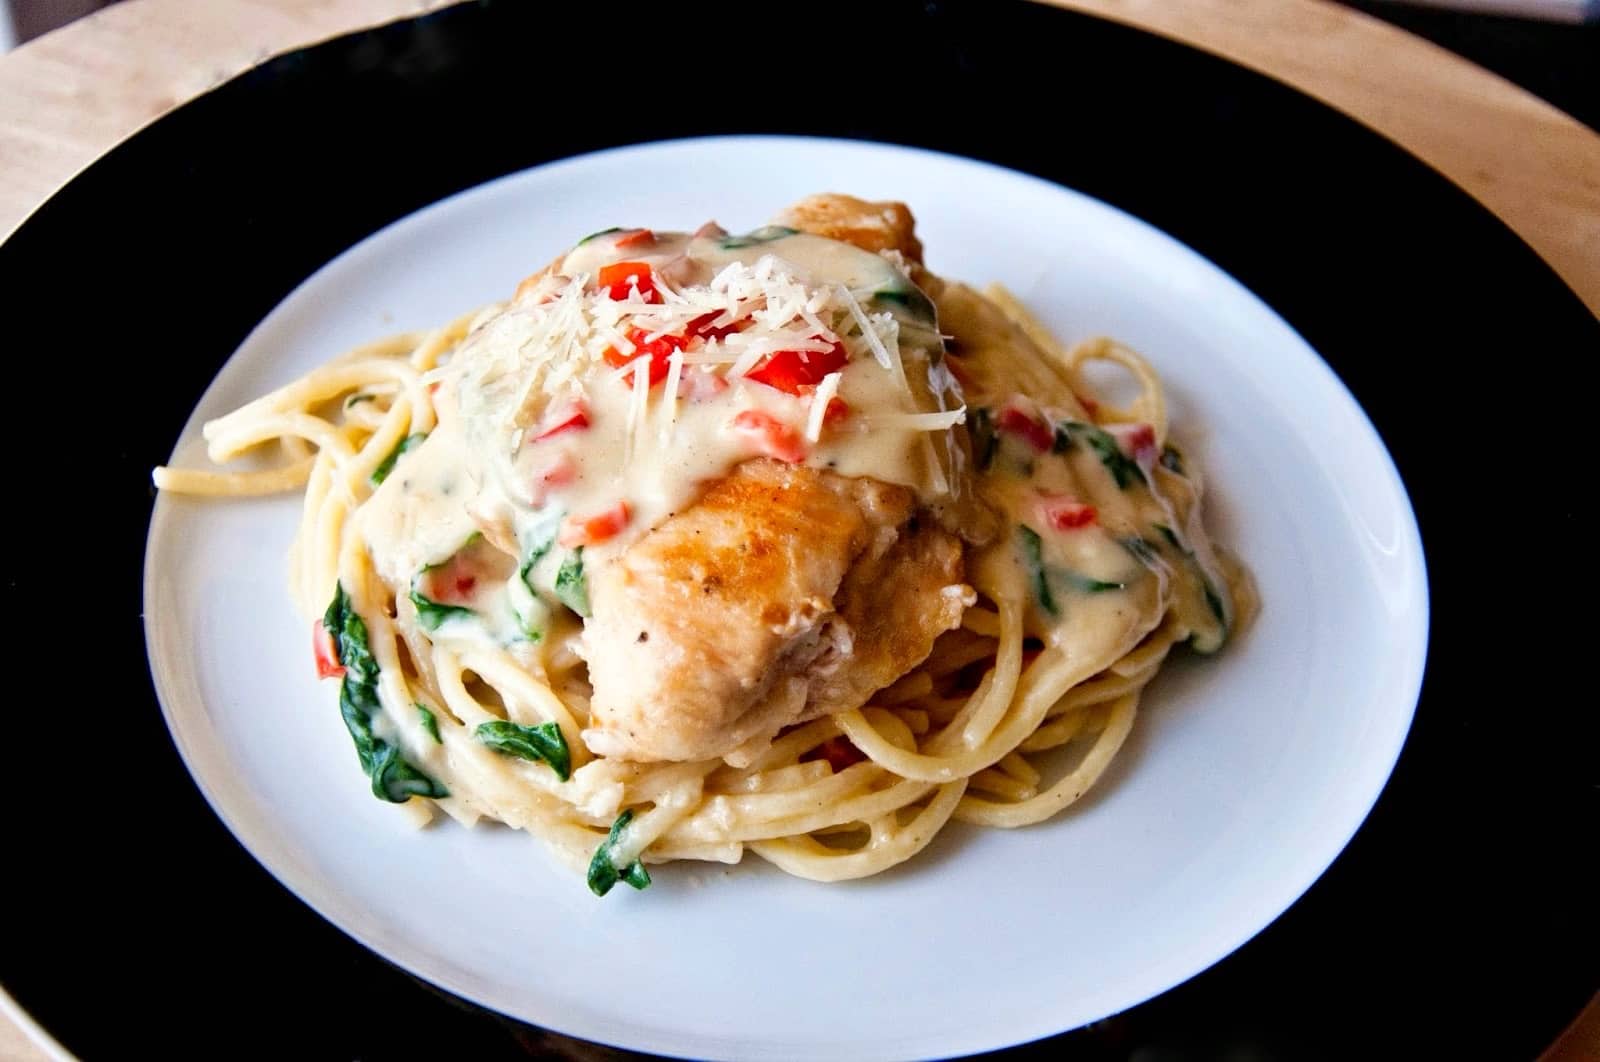 Plated Tuscan chicken with pasta - horizontal.